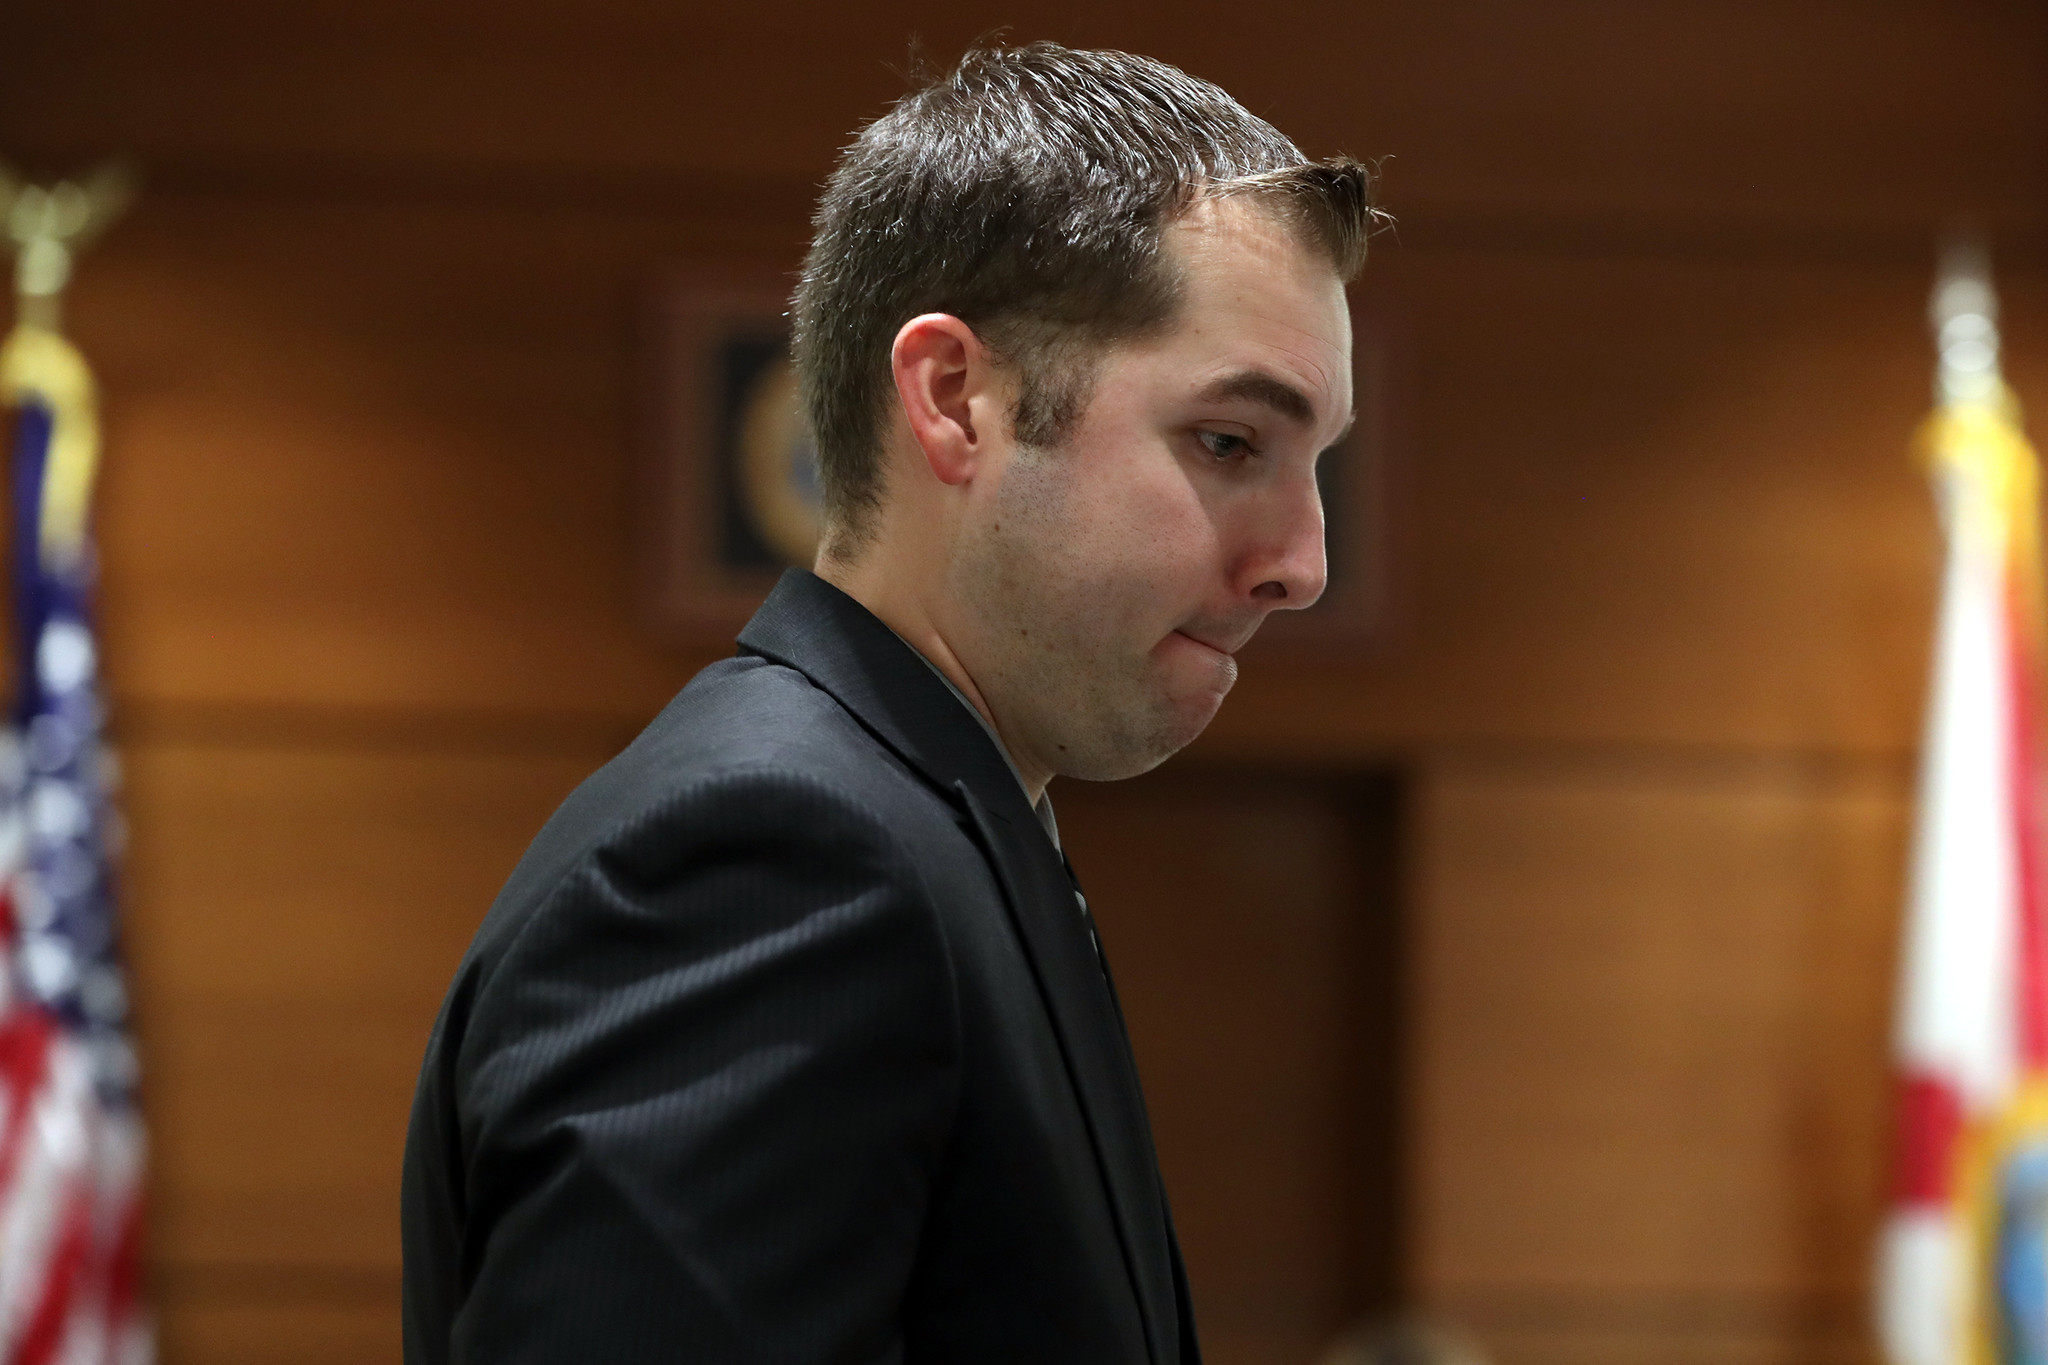 PHOTO: Deputy Christopher Krickovich appears in court during a status hearing at the Broward County Courthouse in Fort Lauderdale, Fla., July 29, 2019. 